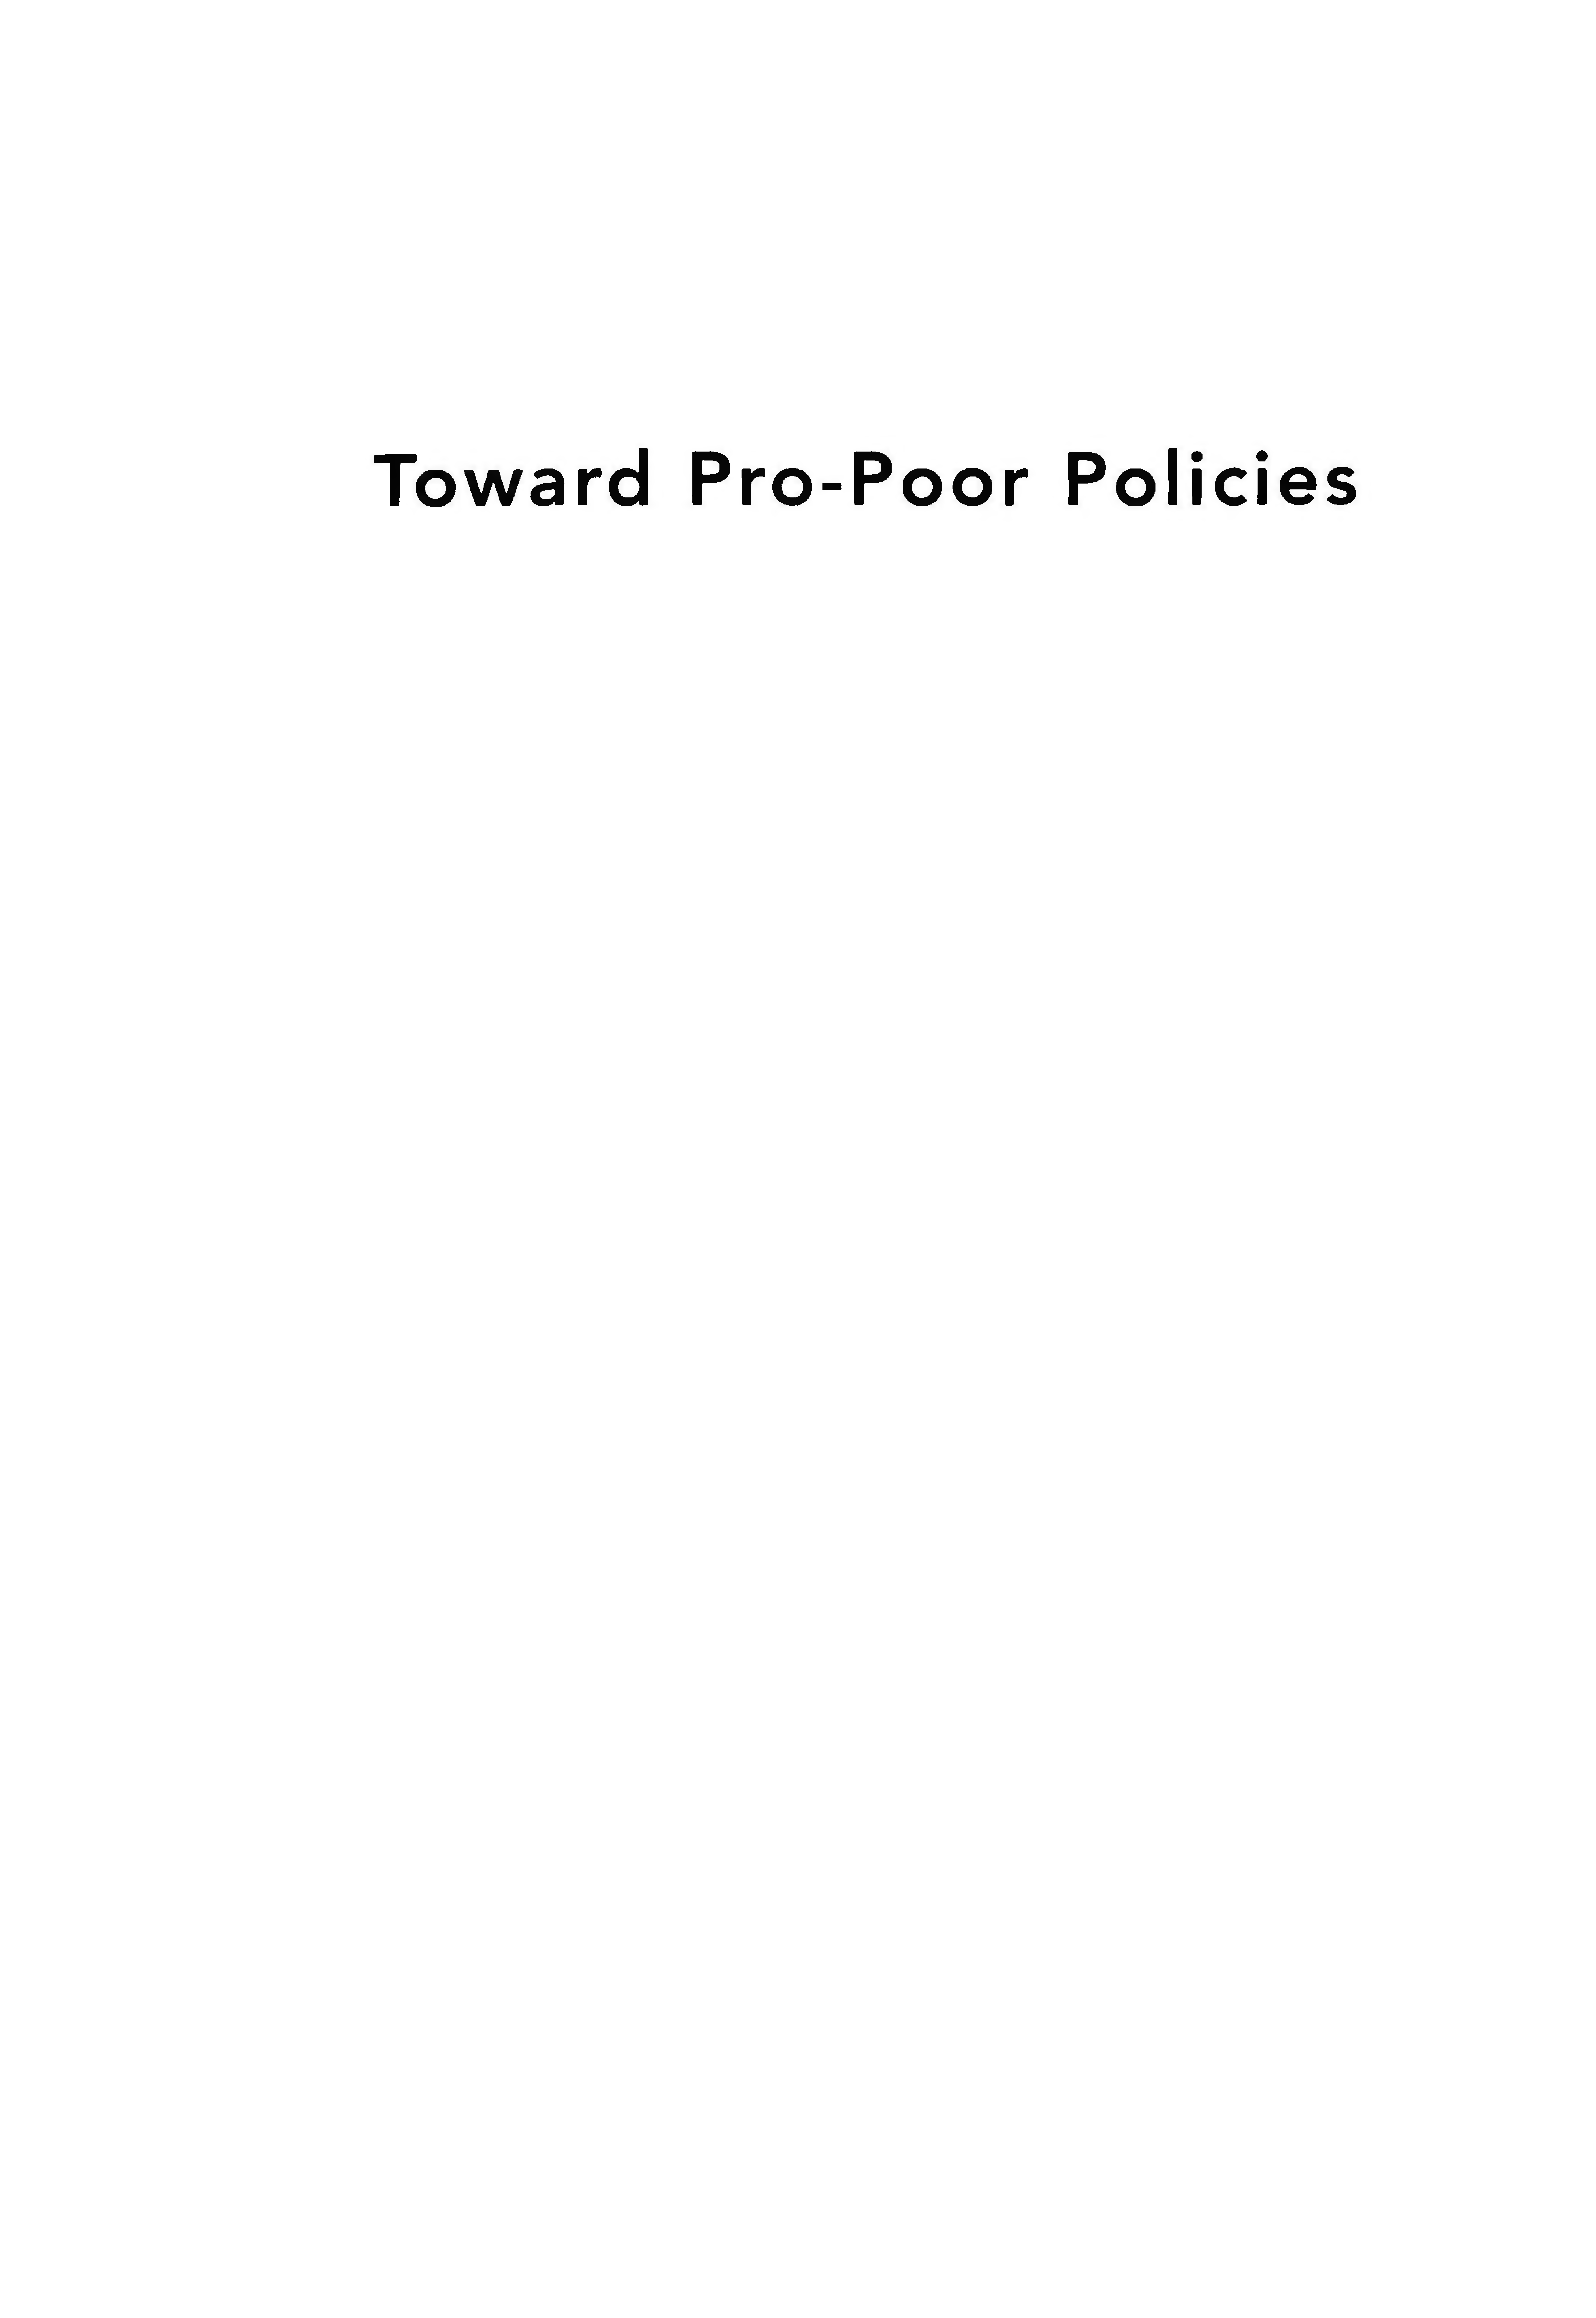 Toward pro-poor policies: Aid, institutions, and globalization